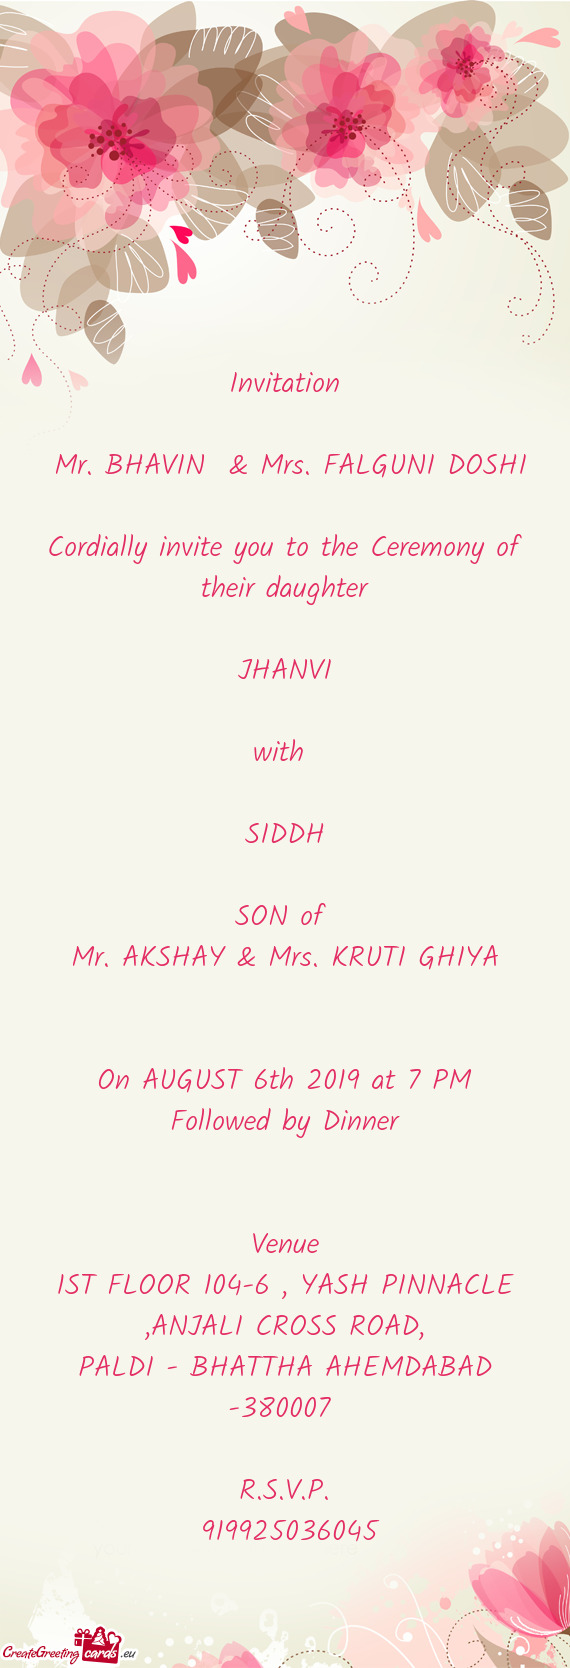 Cordially invite you to the Ceremony of their daughter